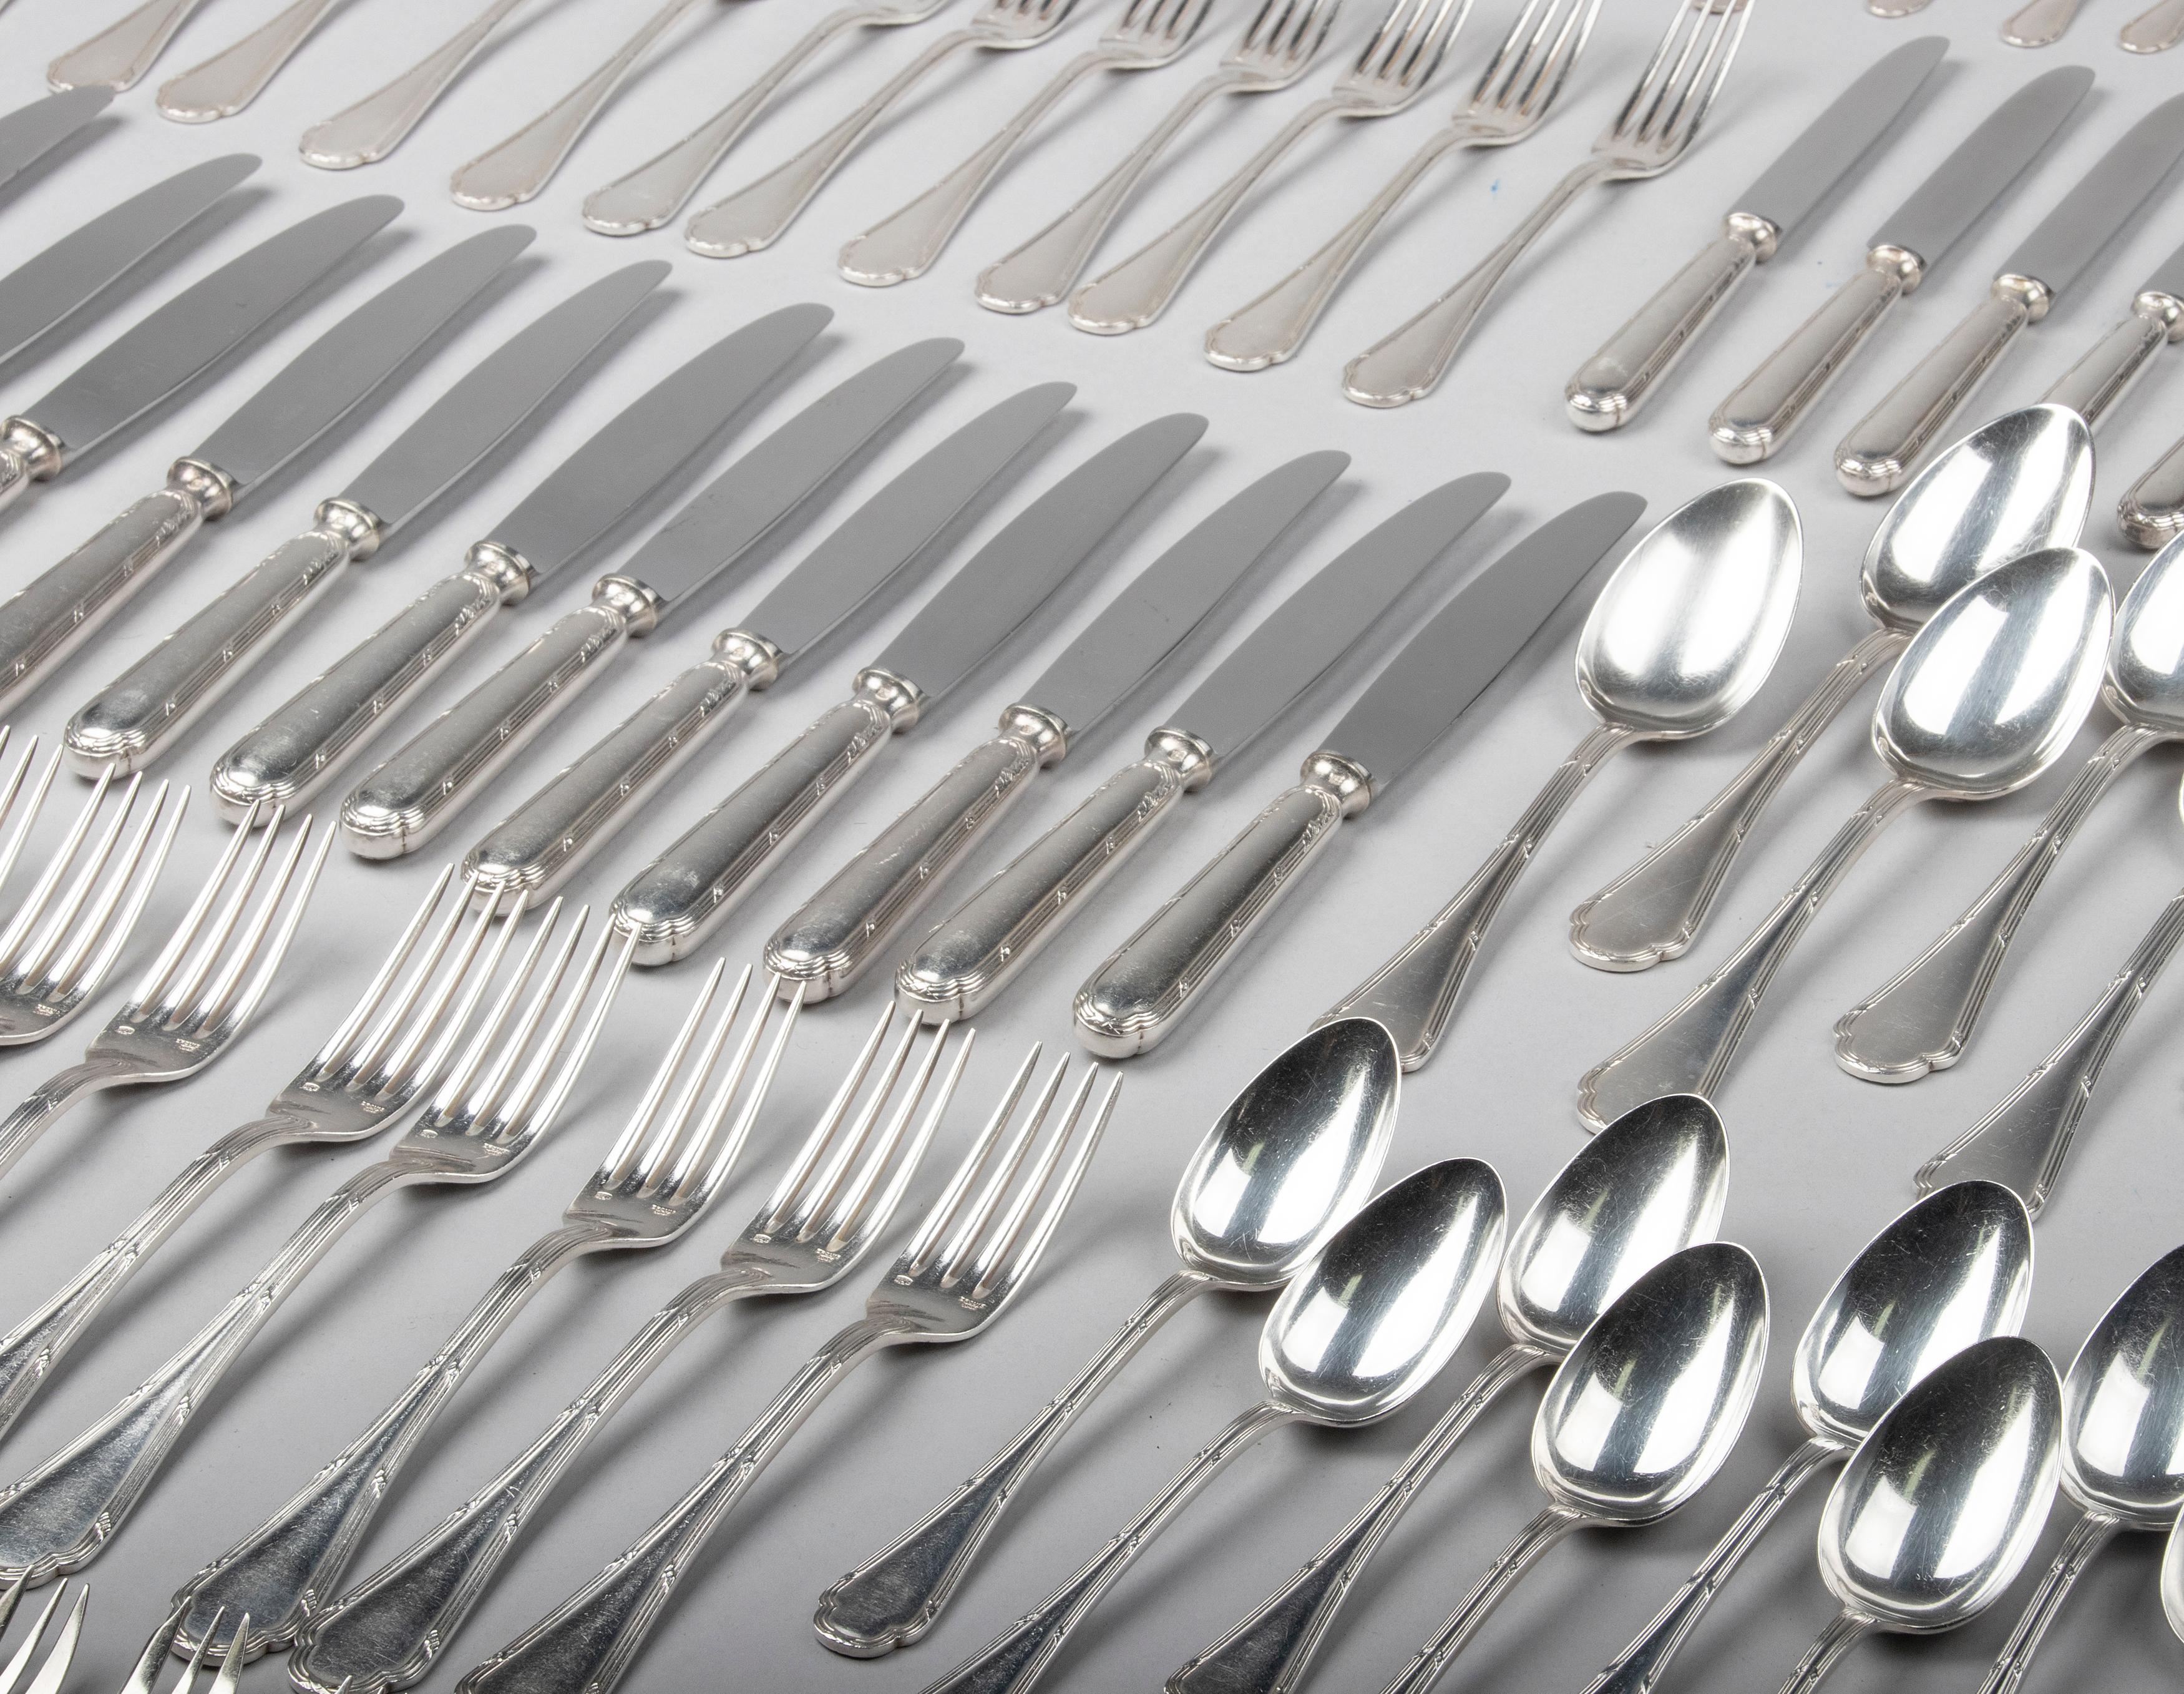 96-Piece Set of Silver-Plate Flatware for 12 Persons, Ercuis Model Ribbon 6